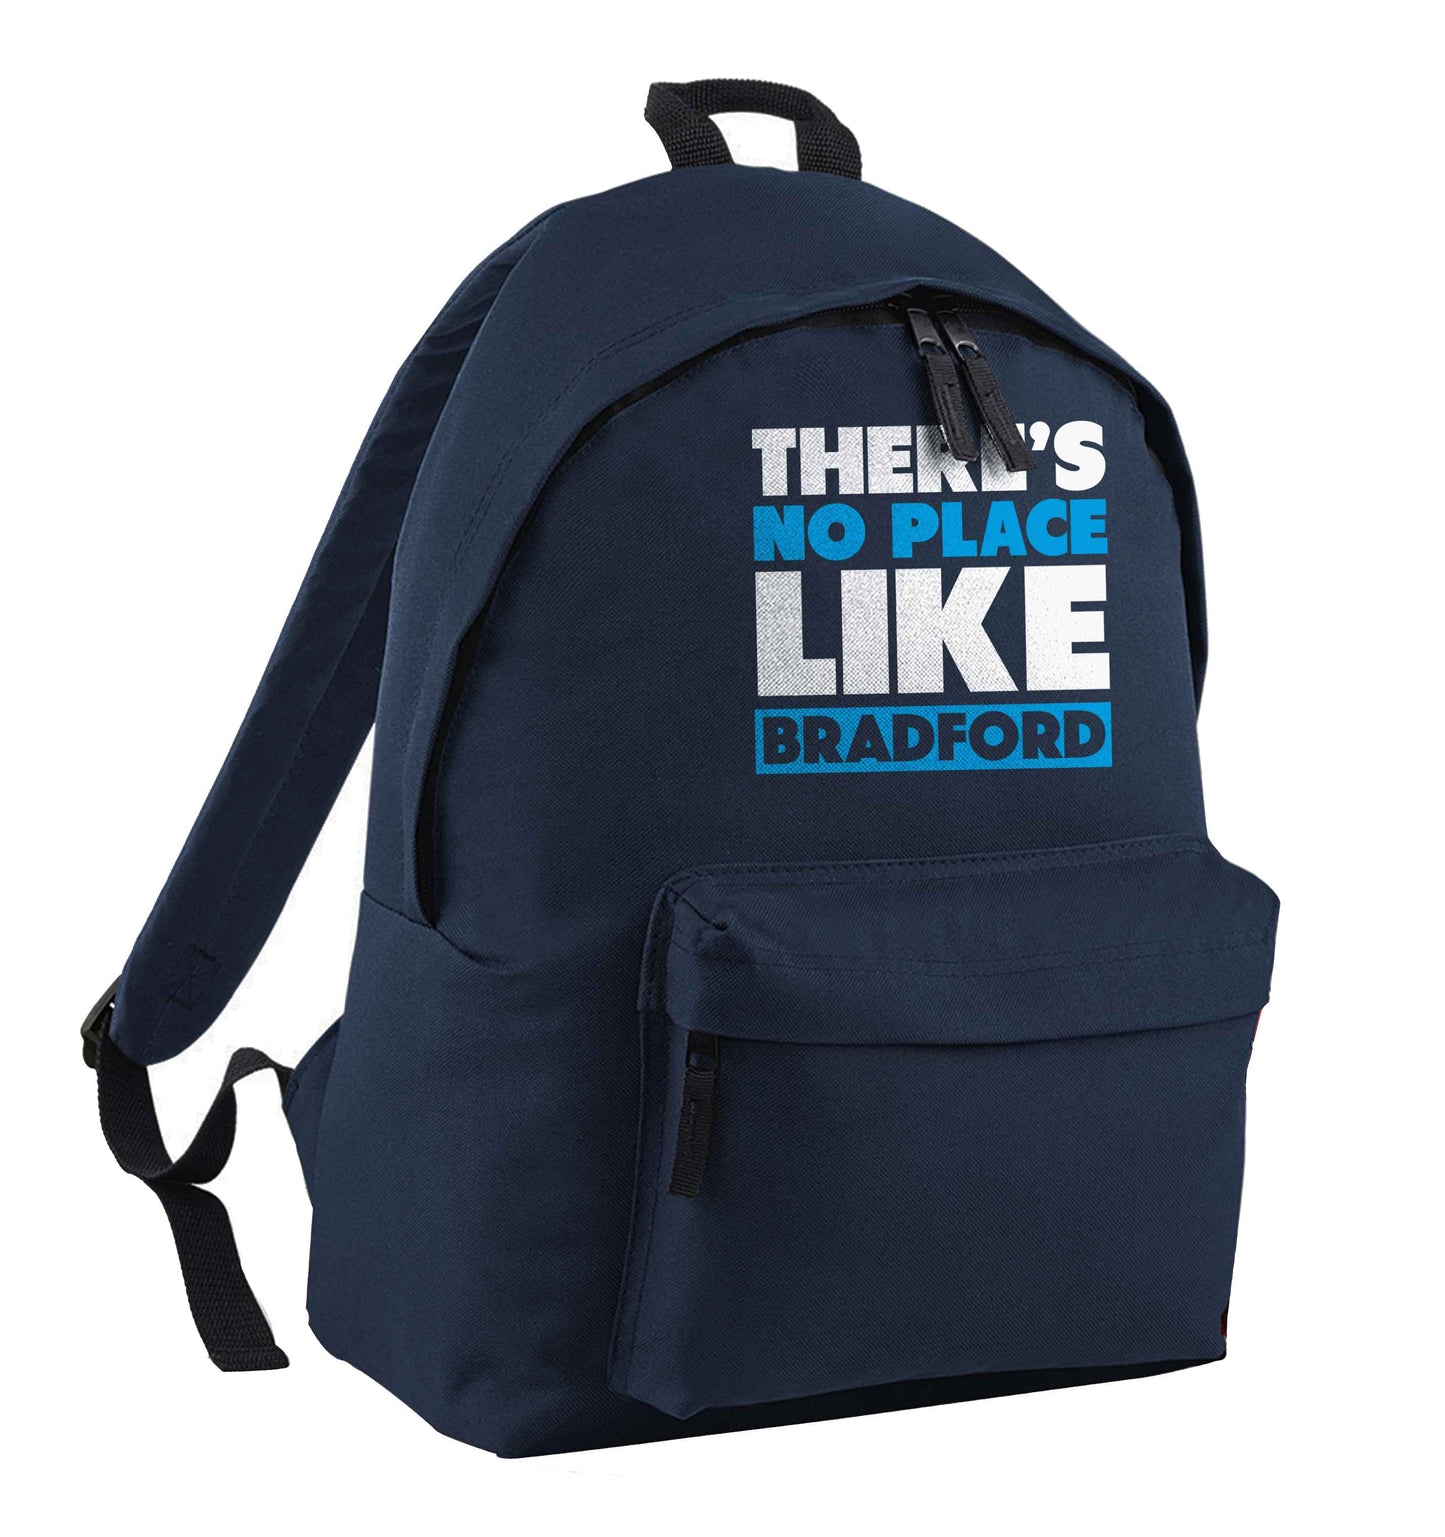 There's no place like Bradford navy children's backpack